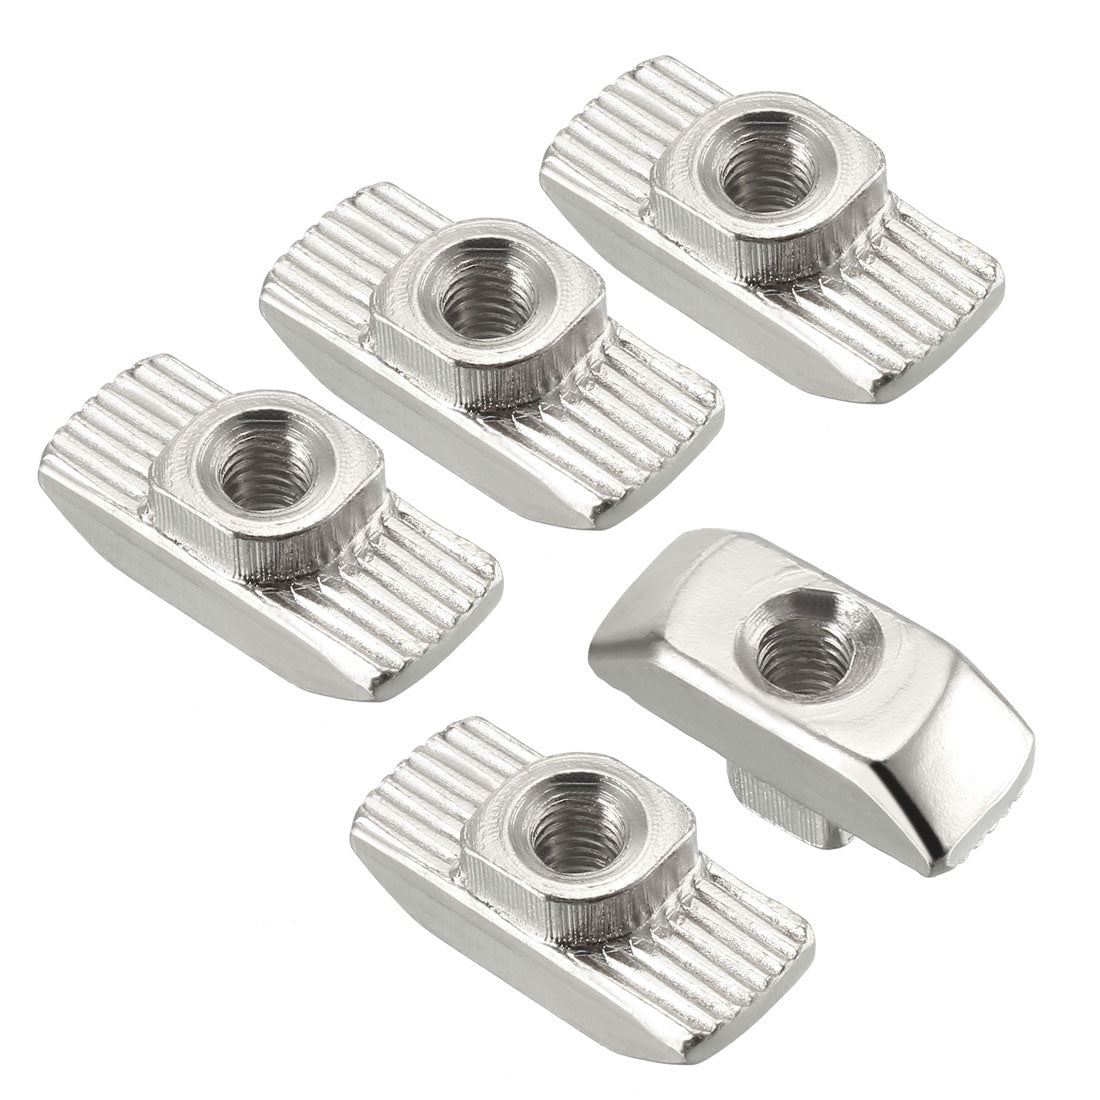 Uxcell Uxcell Sliding T Slot Nuts, M4 Thread for 4040 Series Aluminum Extrusion Profile 30pcs